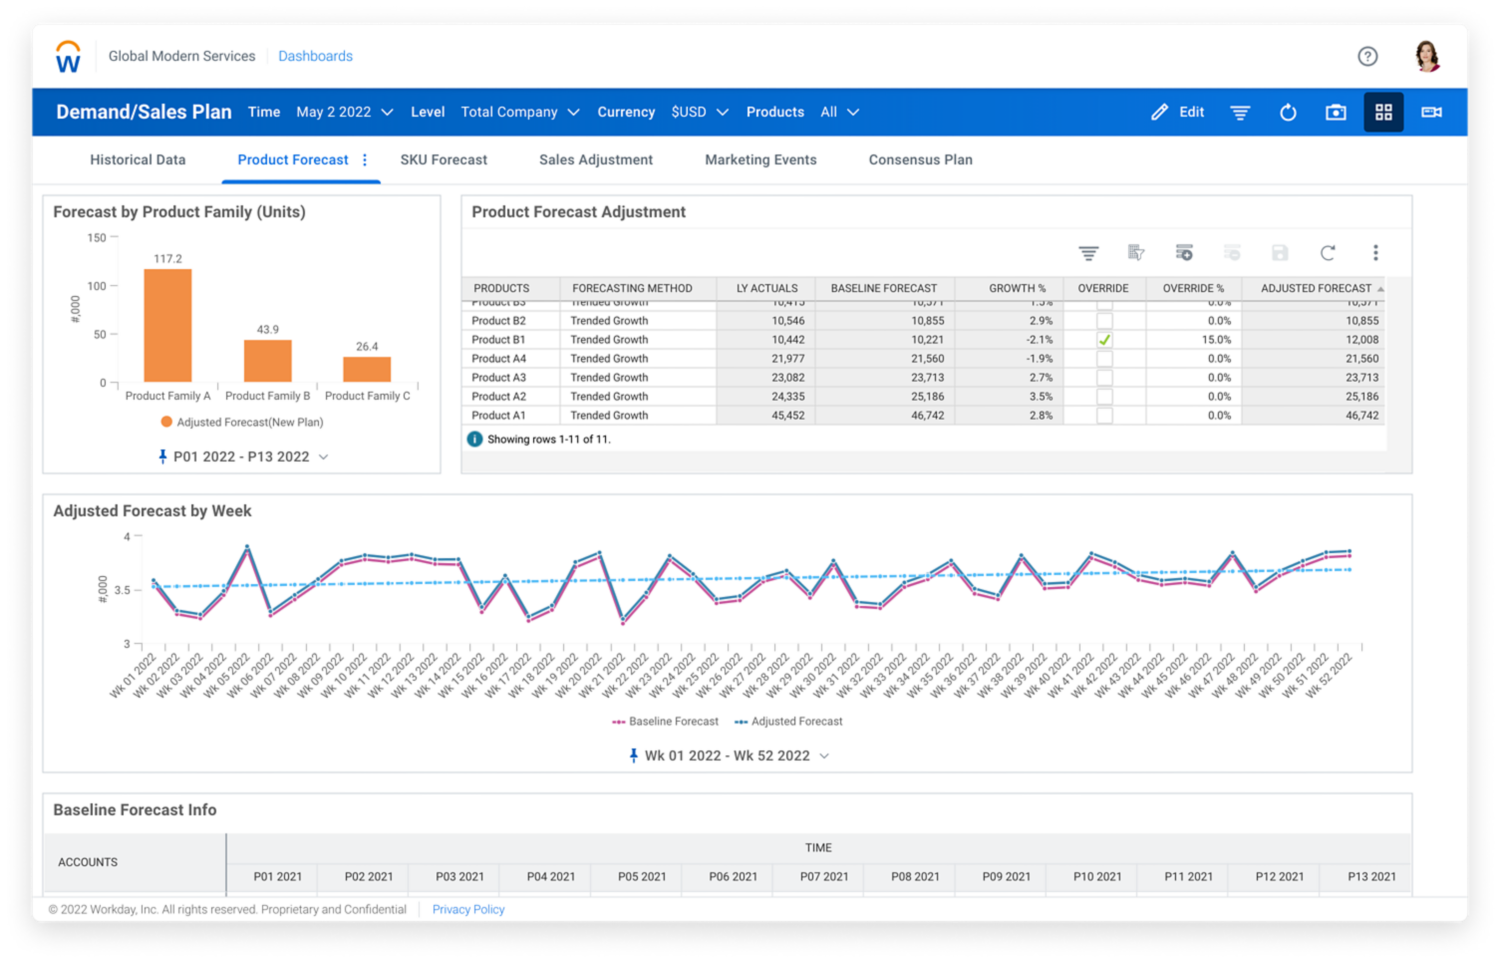 Demand and supply planning dashboard in Workday Adaptive Planning software, showing numerical values and charts for product forecast.